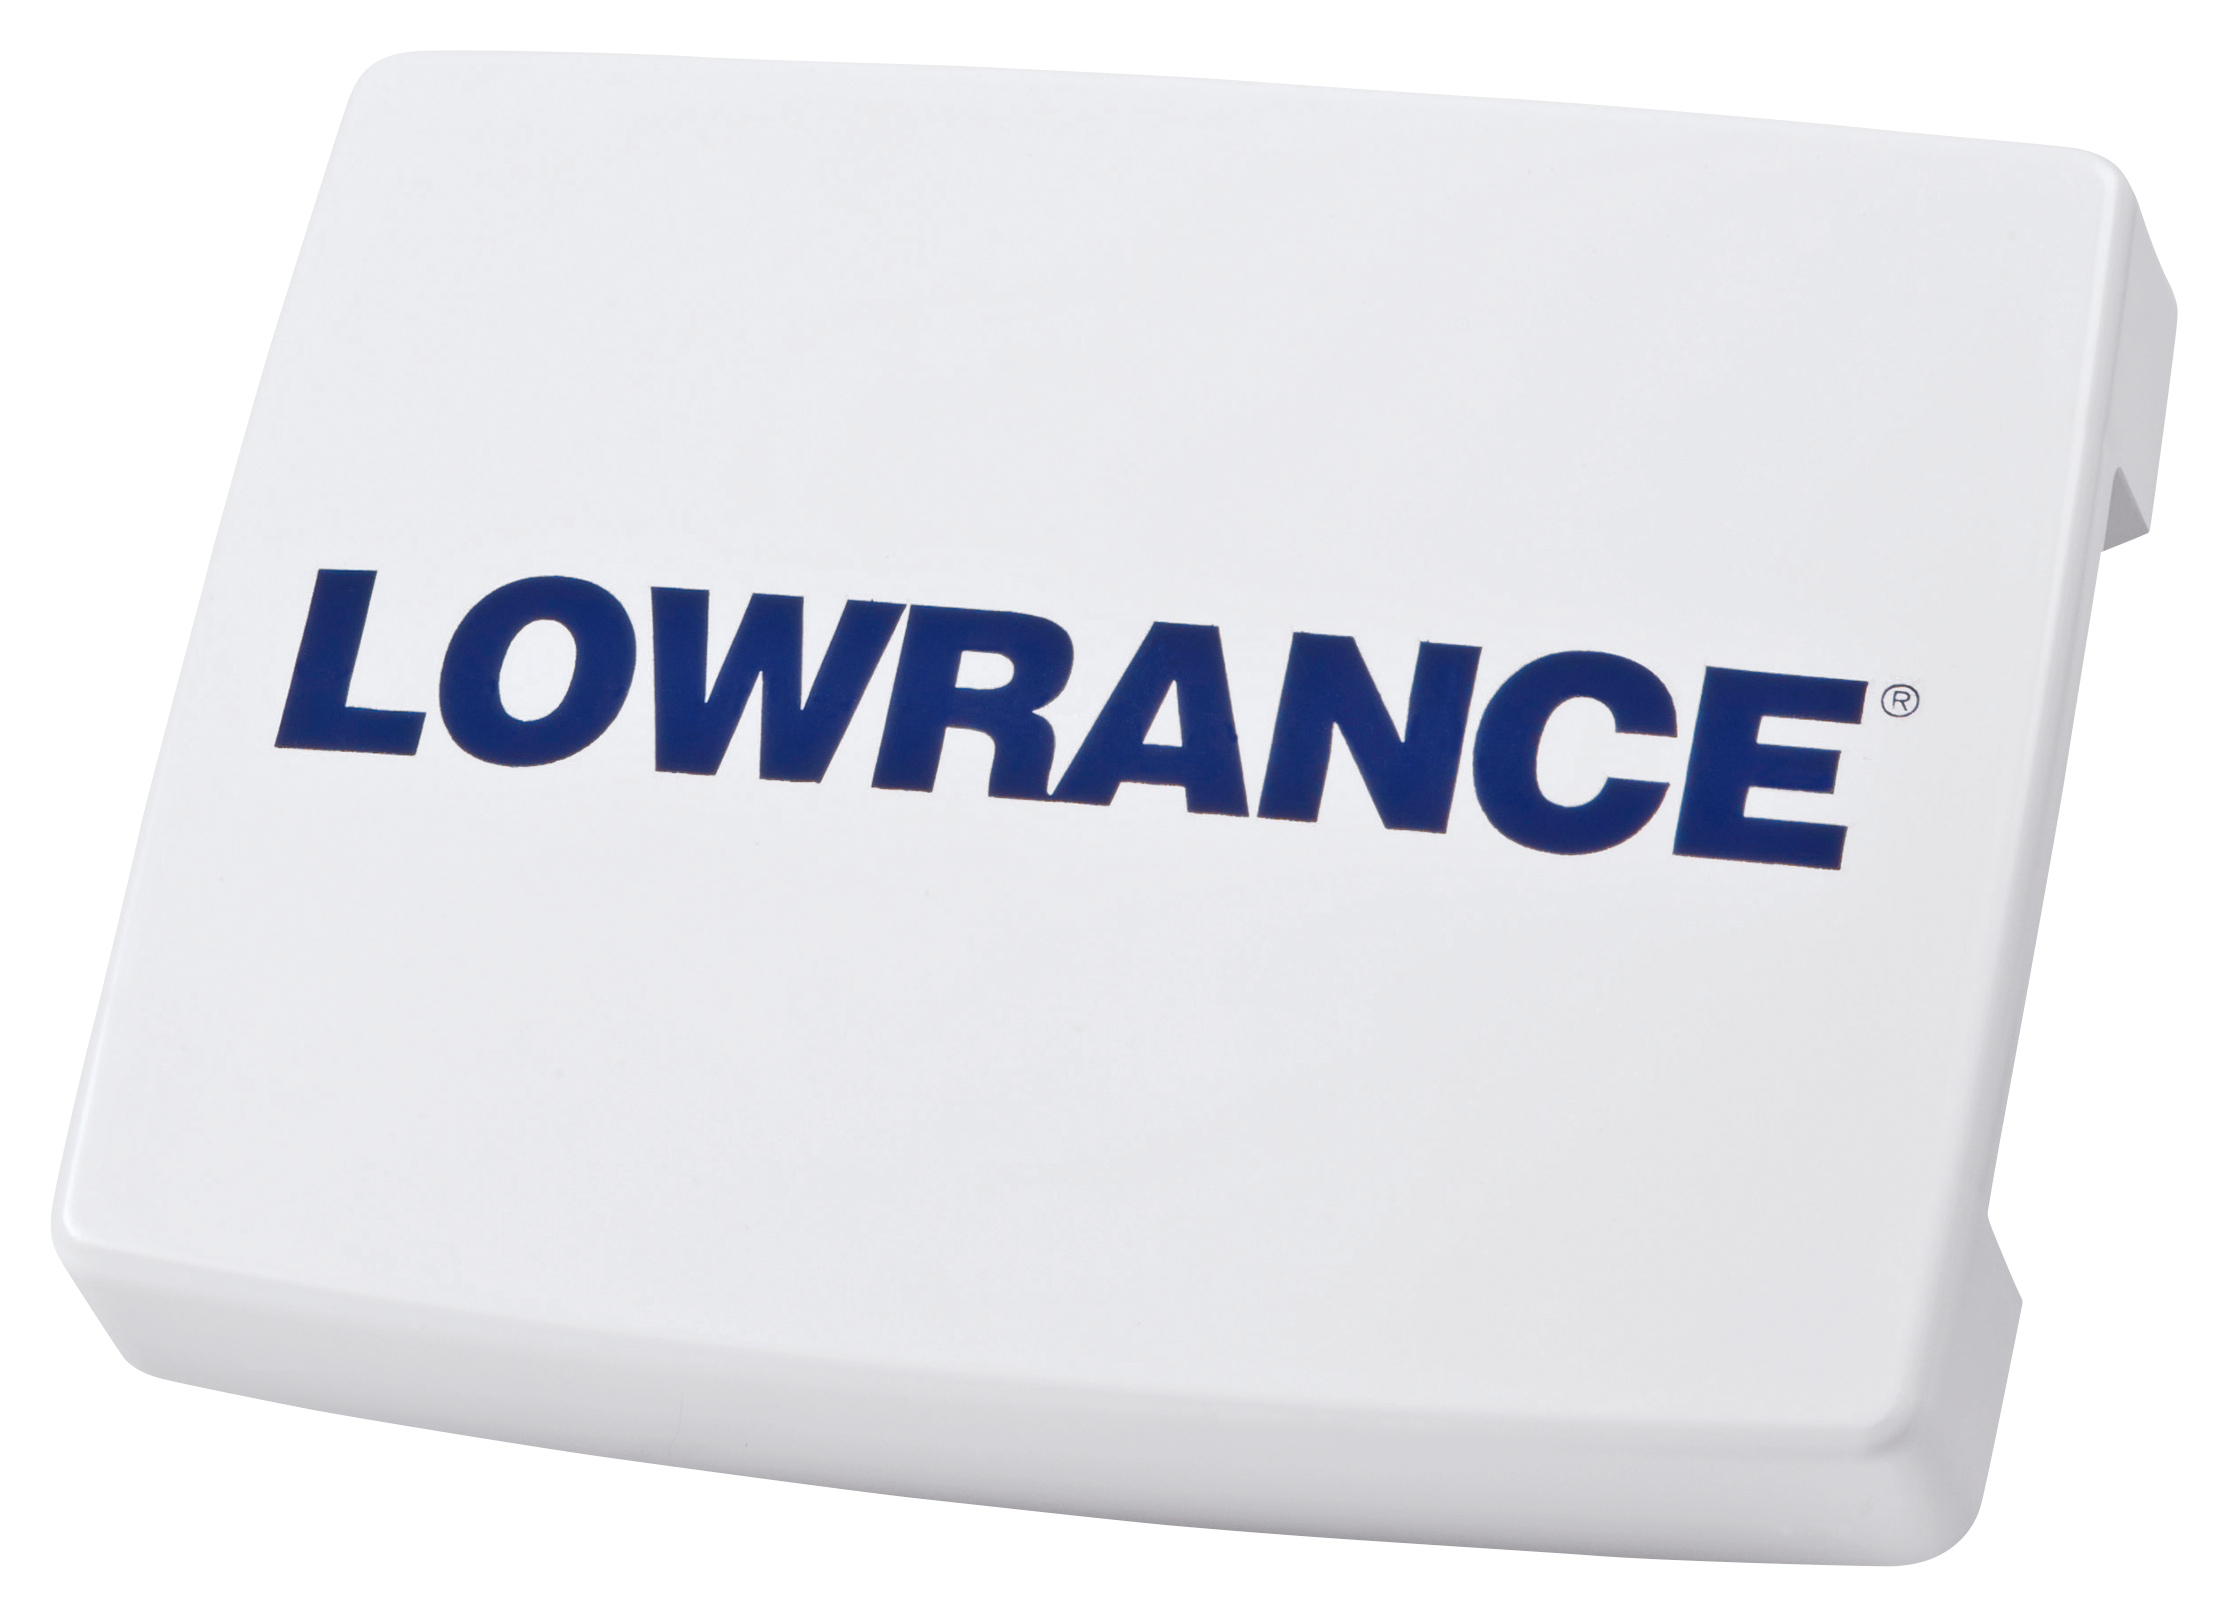 Lowrance Sun Cover for Elite and HOOK 7 Series